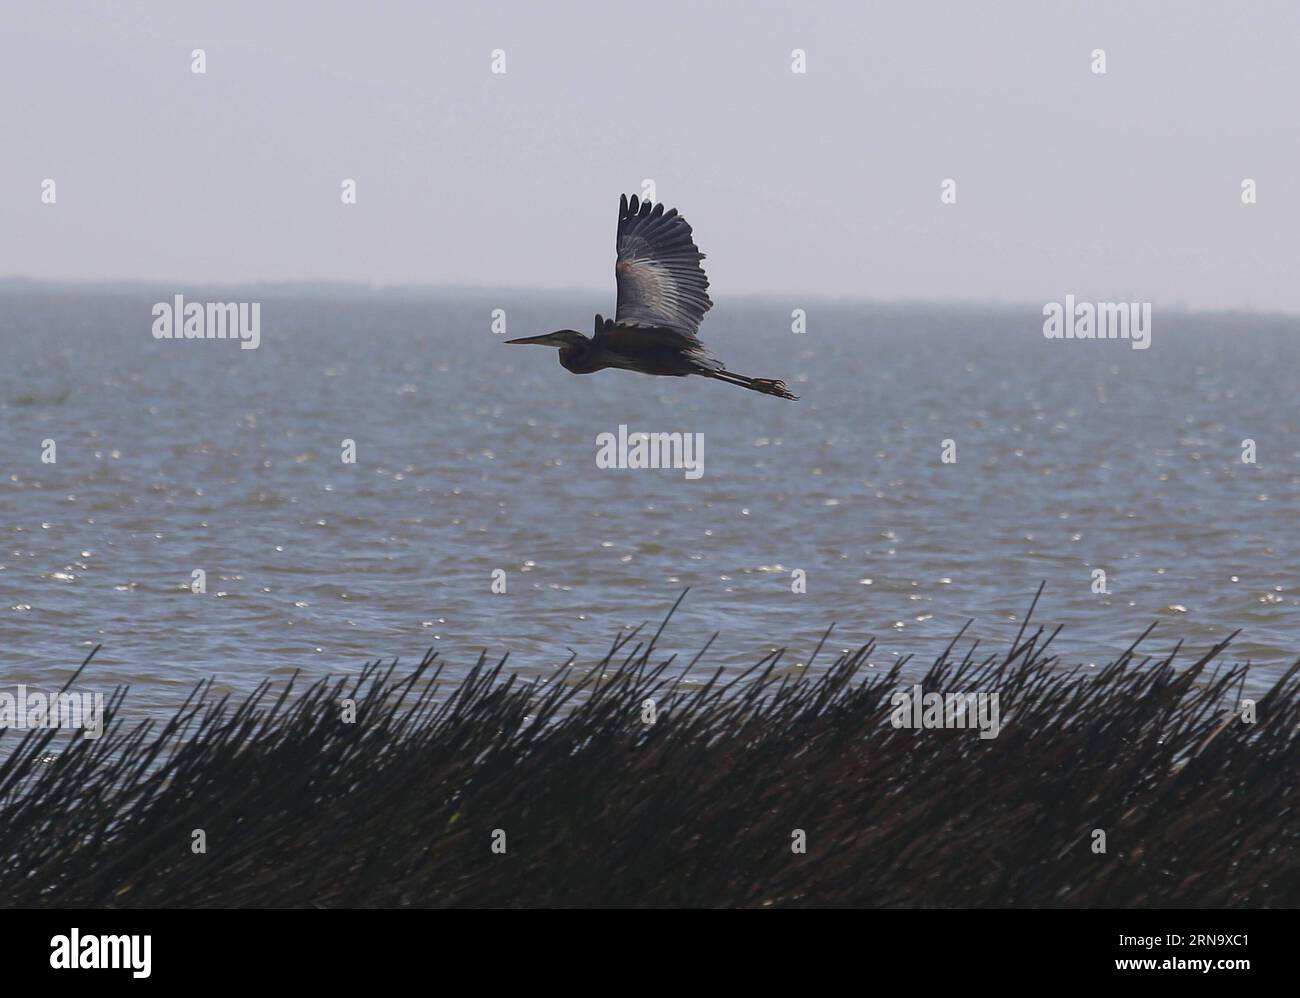 (151223) -- BAGO, Dec. 23, 2015 -- Photo taken on Dec. 23, 2015 shows a purple heron flying over Moeyungyi Wetland Wildlife Sanctuary in Bago region, Myanmar. Moeyungyi Wetlands is situated in Bago Division. Every year, millions of birds usually fly from the northern hemisphere to the south along the East-Asian Australian Flyway to escape from winter. They stop to rest and feed in Asia. So the flyway contains a network of wetlands and Moeyungyi is one of which could cooperate to certain migrated as well as domestic birds. ) MYANMAR-BAGO-WETLAND-WILDLIFE UxAung PUBLICATIONxNOTxINxCHN   151223 B Stock Photo